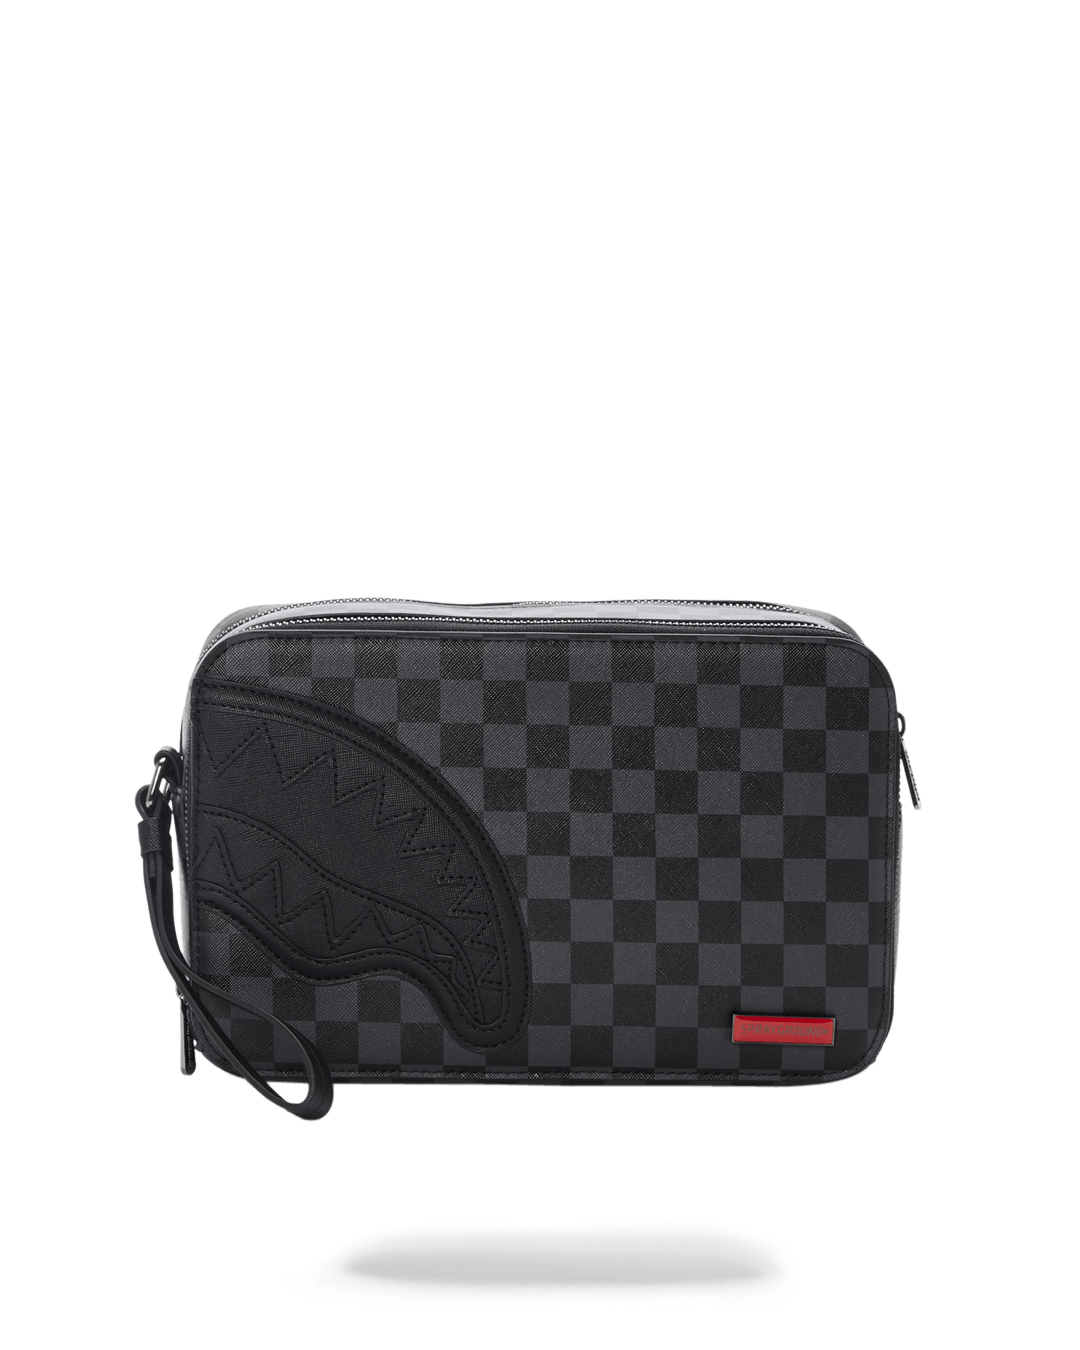 HENNY BLACK TOILETRY BAG - HIGH QUALITY AND INEXPENSIVE - HENNY BLACK TOILETRY BAG HIGH QUALITY AND INEXPENSIVE-31